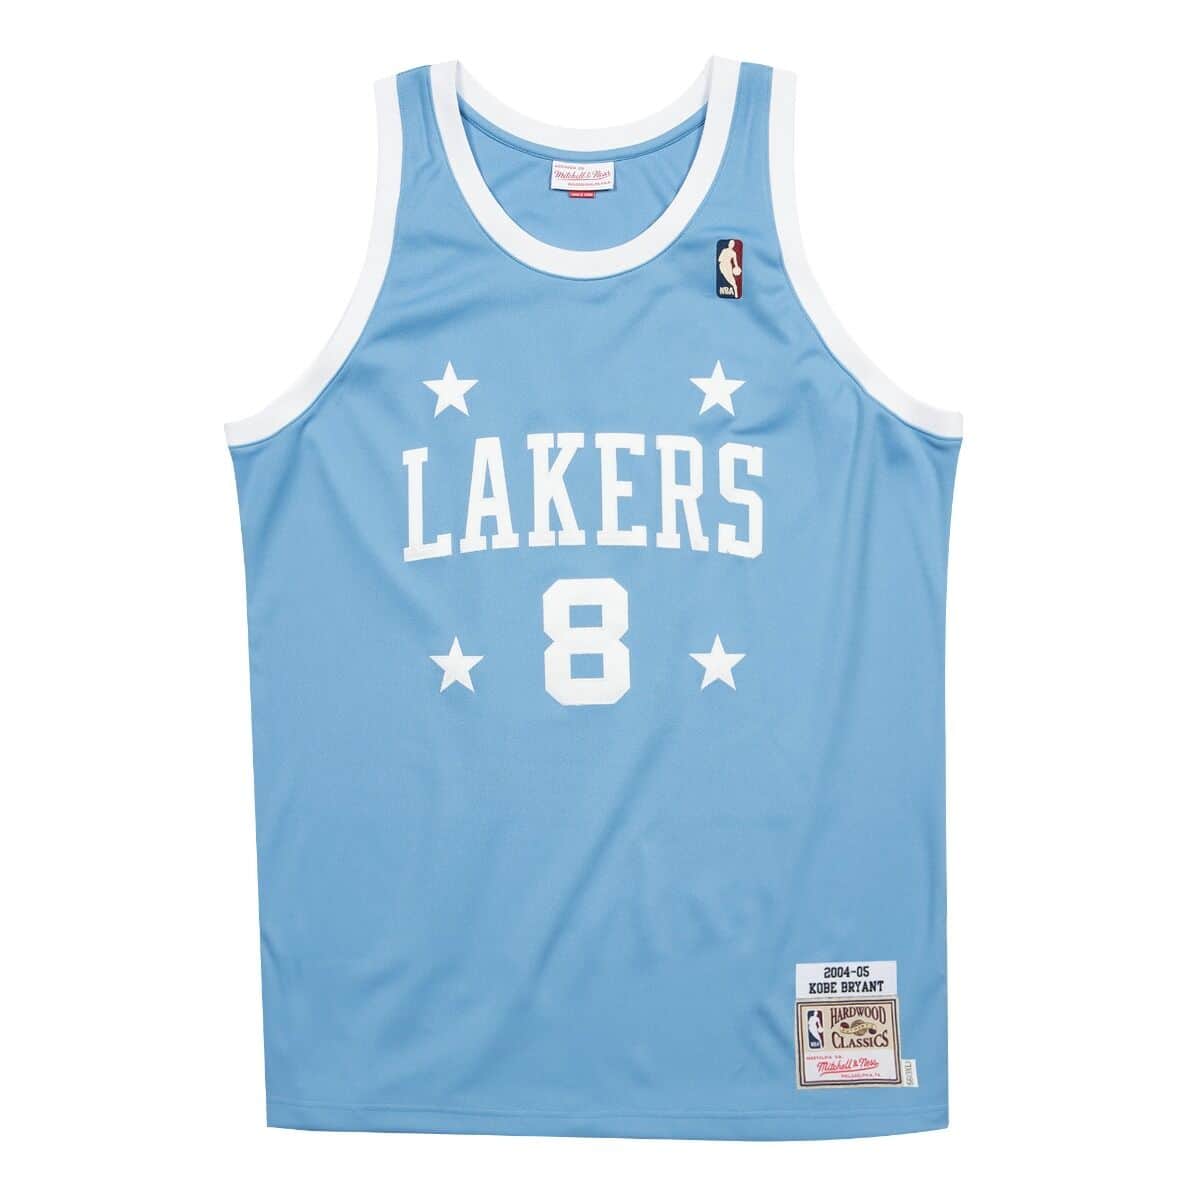 LEAK: New LA Lakers Blue and Silver “City” Jersey for 2021